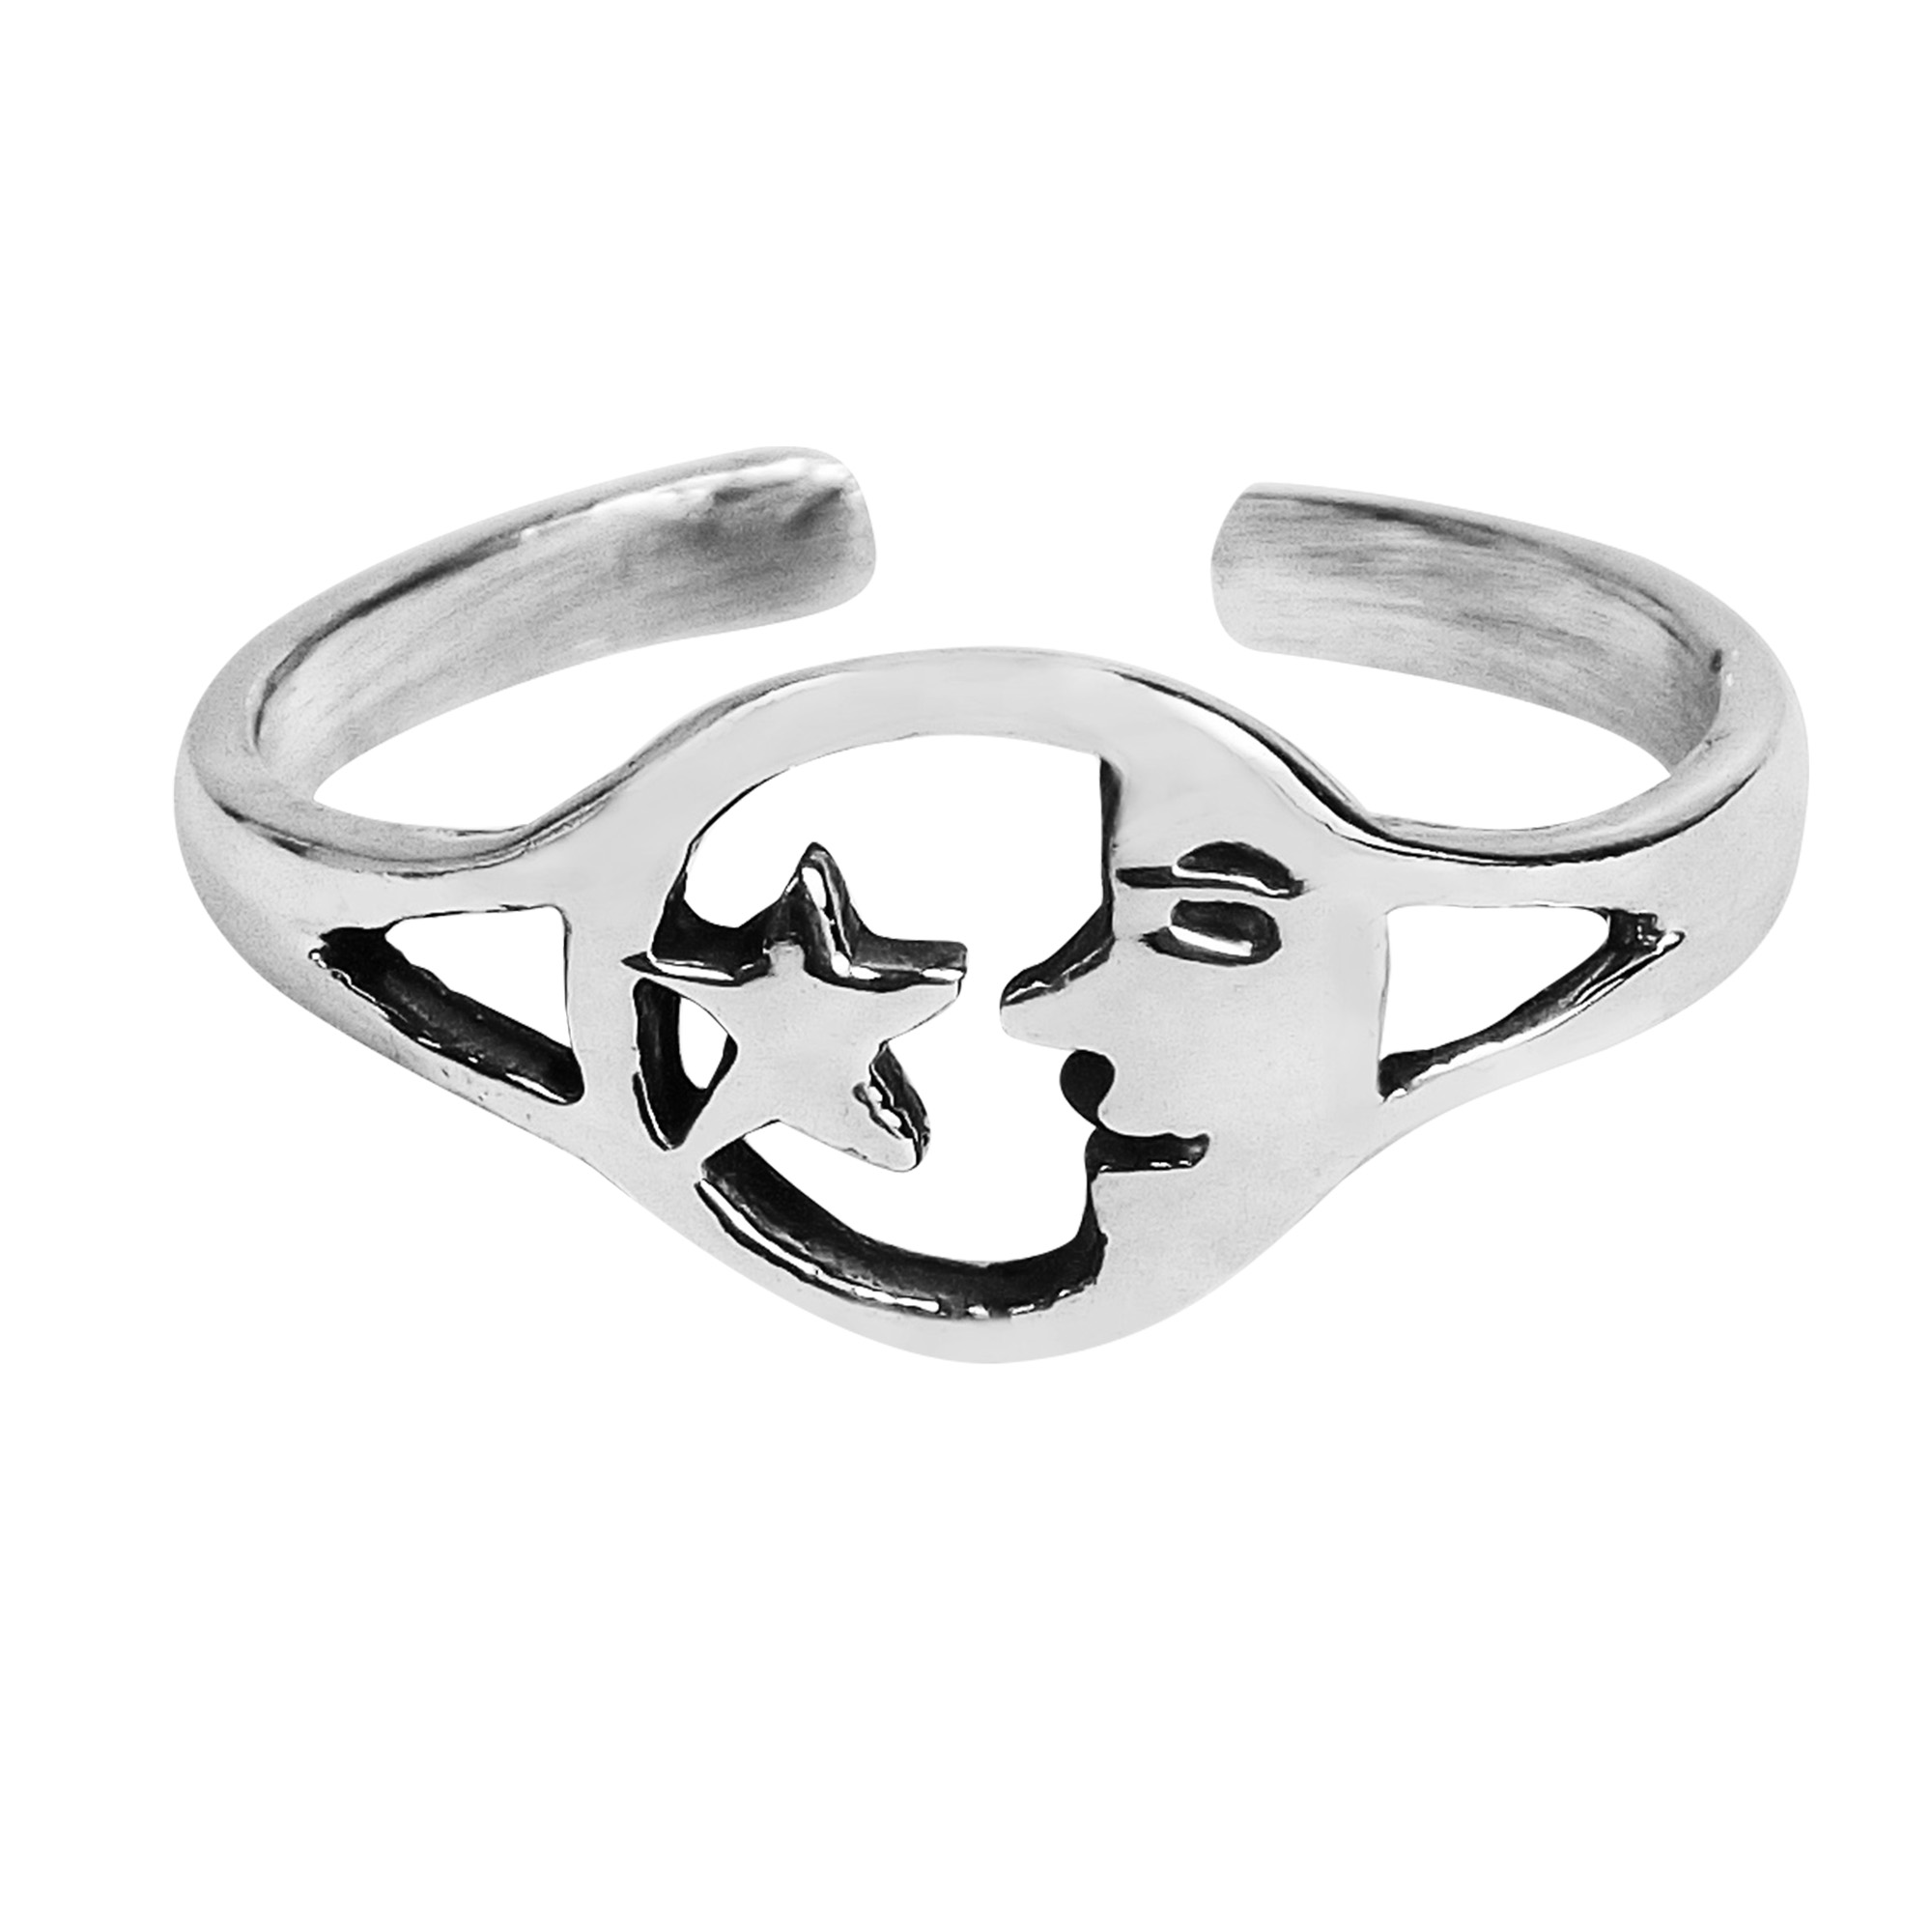 AeraVida Celestial Sky Sun Moon and Star .925 Sterling Silver Toe Ring or Pinky Ring 